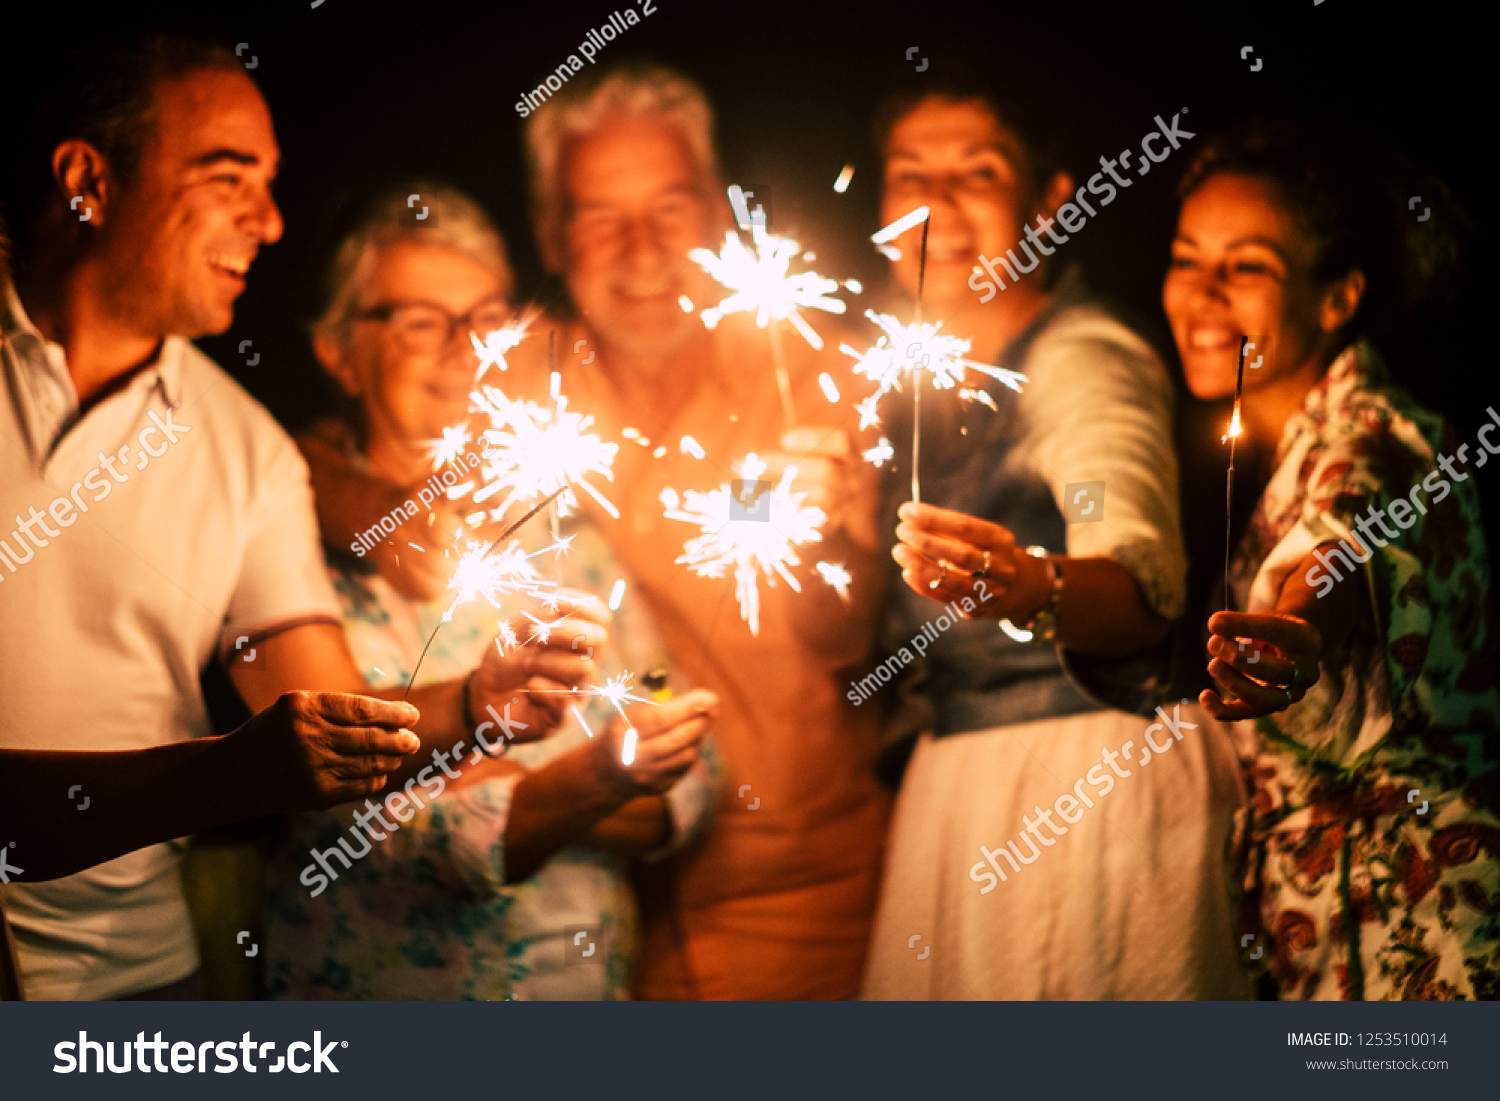 group of people have fun celebrating together new year eve or birthday with sparkles light and fireworks in friendship outdoor at evening time - family and friends different ages celebrate friendly  #1253510014